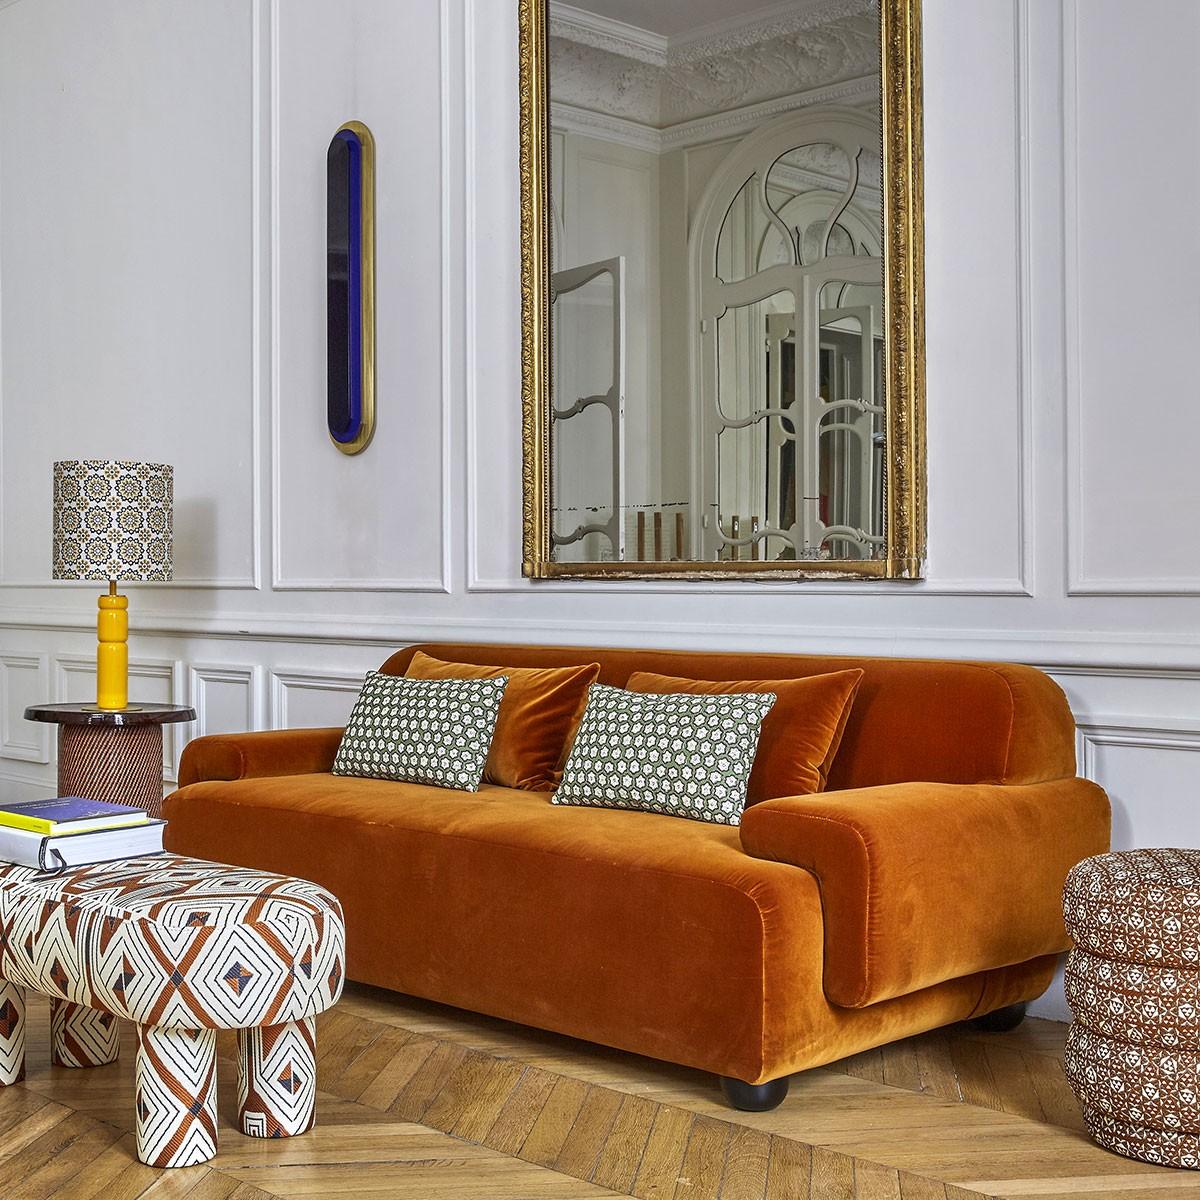 Popus Editions Lena 4 Seater Sofa in Oil Como Velvet Upholstery

It looks like it's straight out of a movie, with its generous curves and wide armrests. It is a real invitation to spend long Sundays with the family, comfortably seated in front of